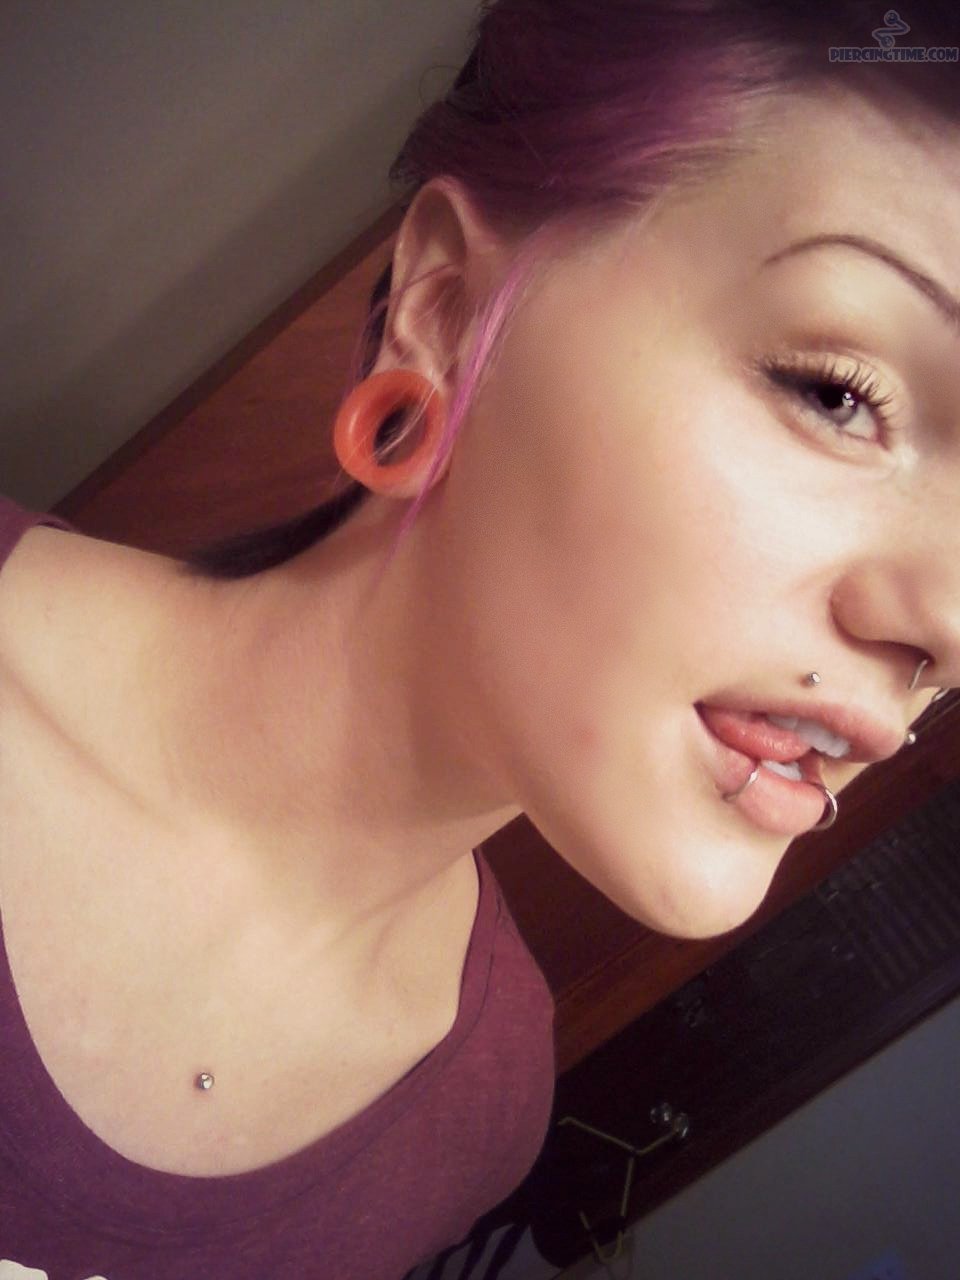 Lobe Stretching And Canine Bites Piercing Picture For Girls